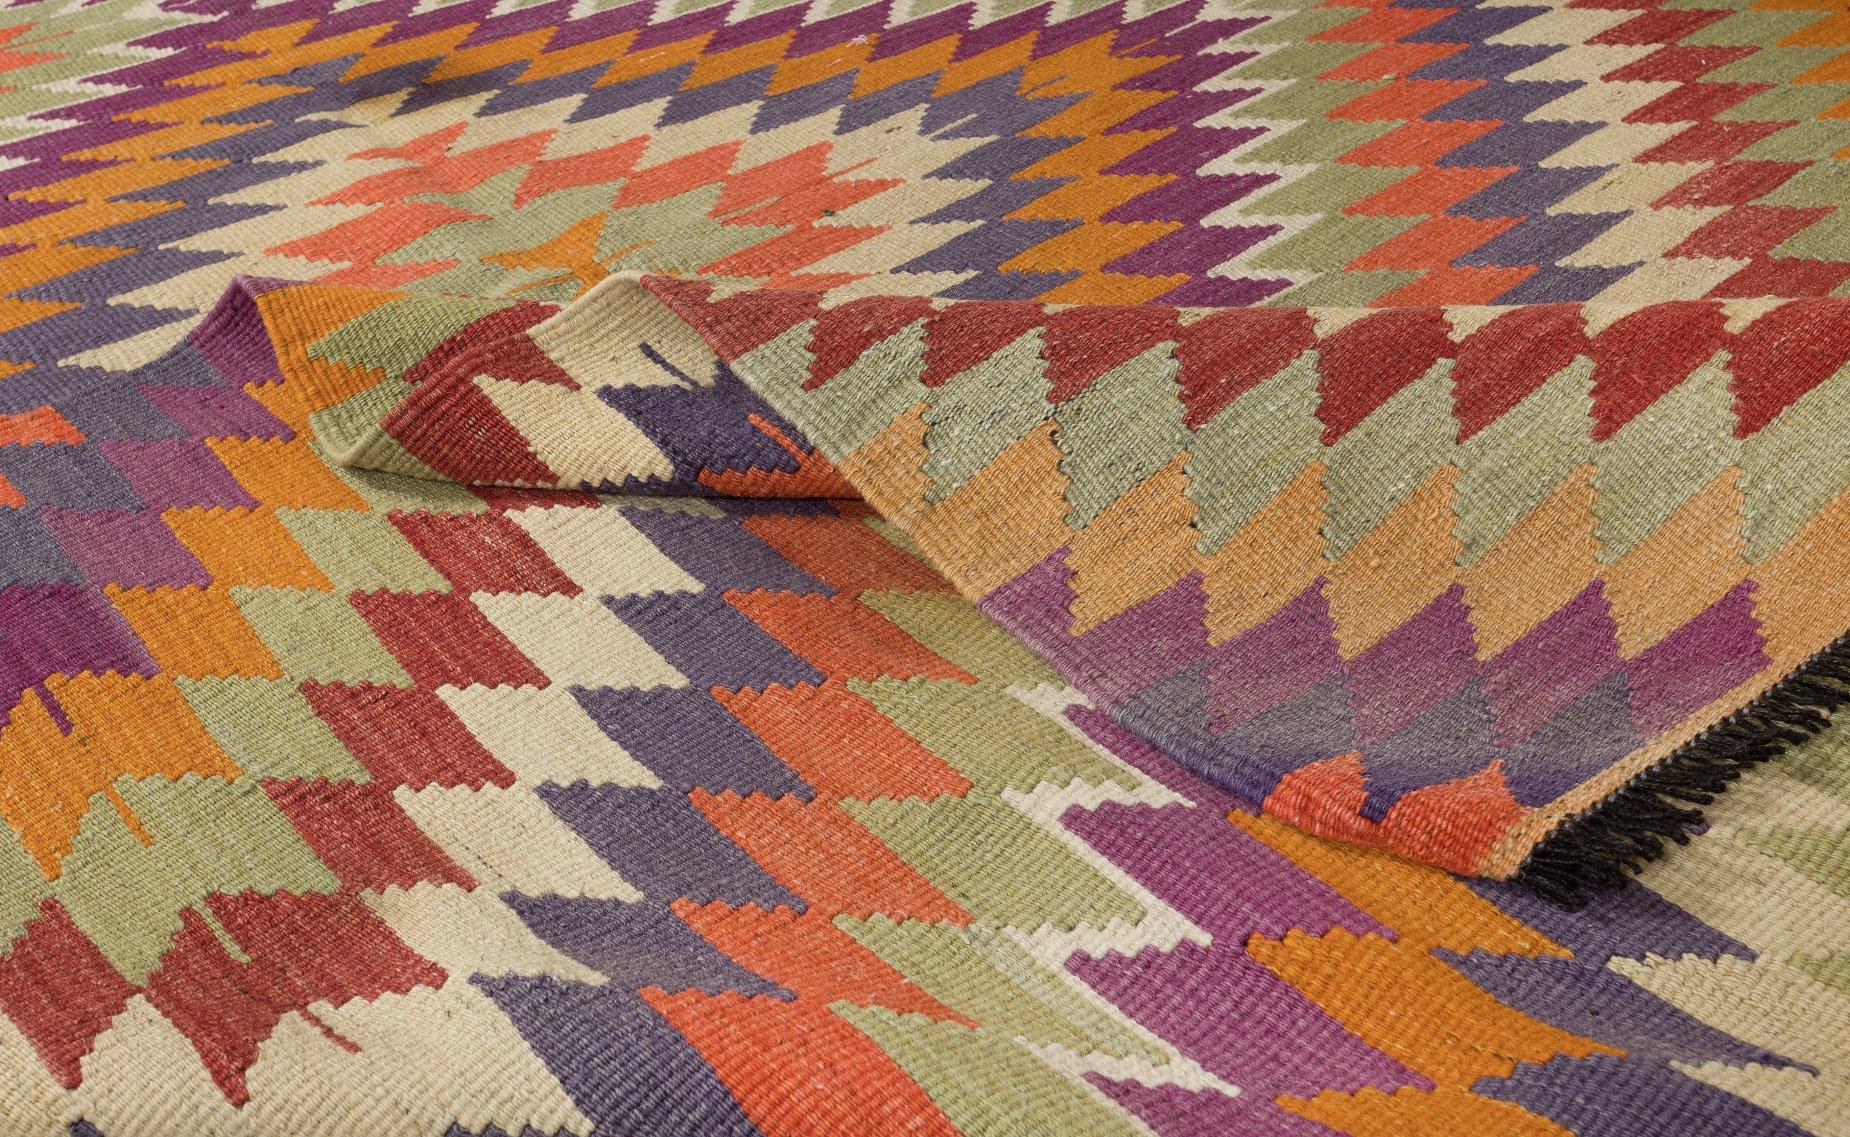 Hand-Woven 5.8x10 Ft Multicolored Handmade Turkish Wool Kilim, One of a Kind Flat-Weave Rug For Sale